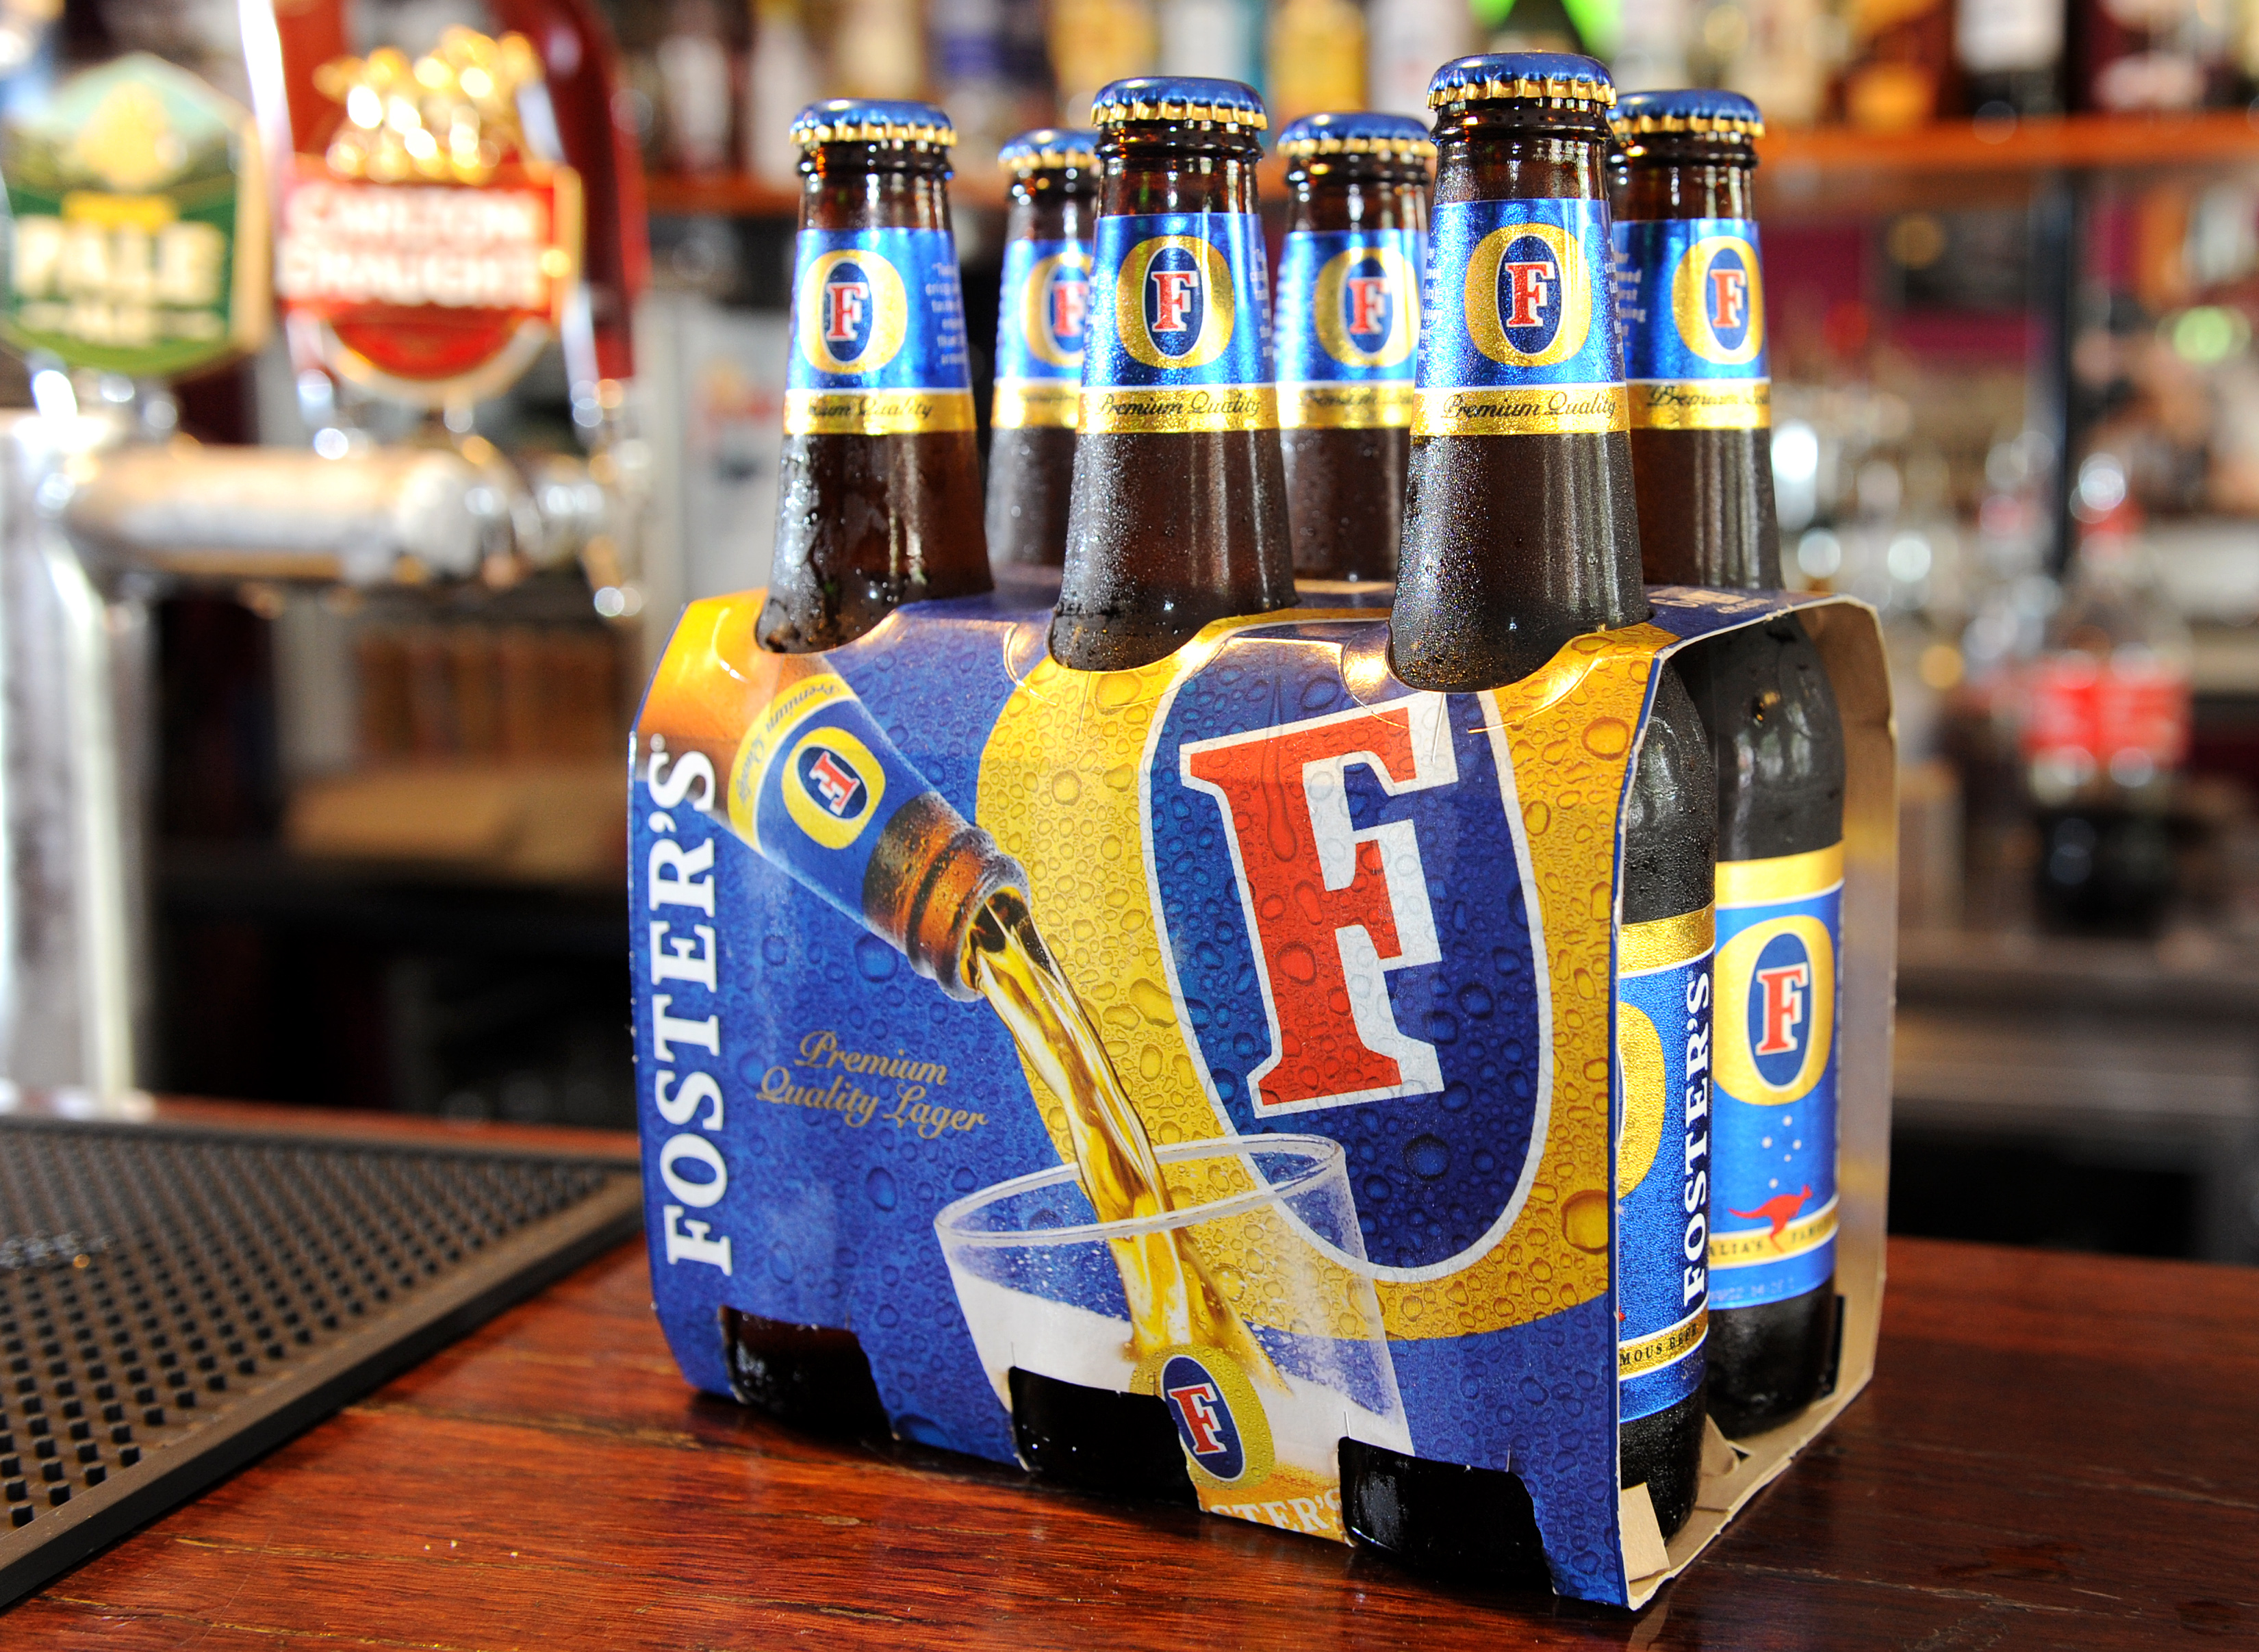 Bottles of Foster's beer sits on the bar at the Drop Bear Inn in South Melbourne on November 25, 2011. (William West&mdash;AFP/Getty Images)